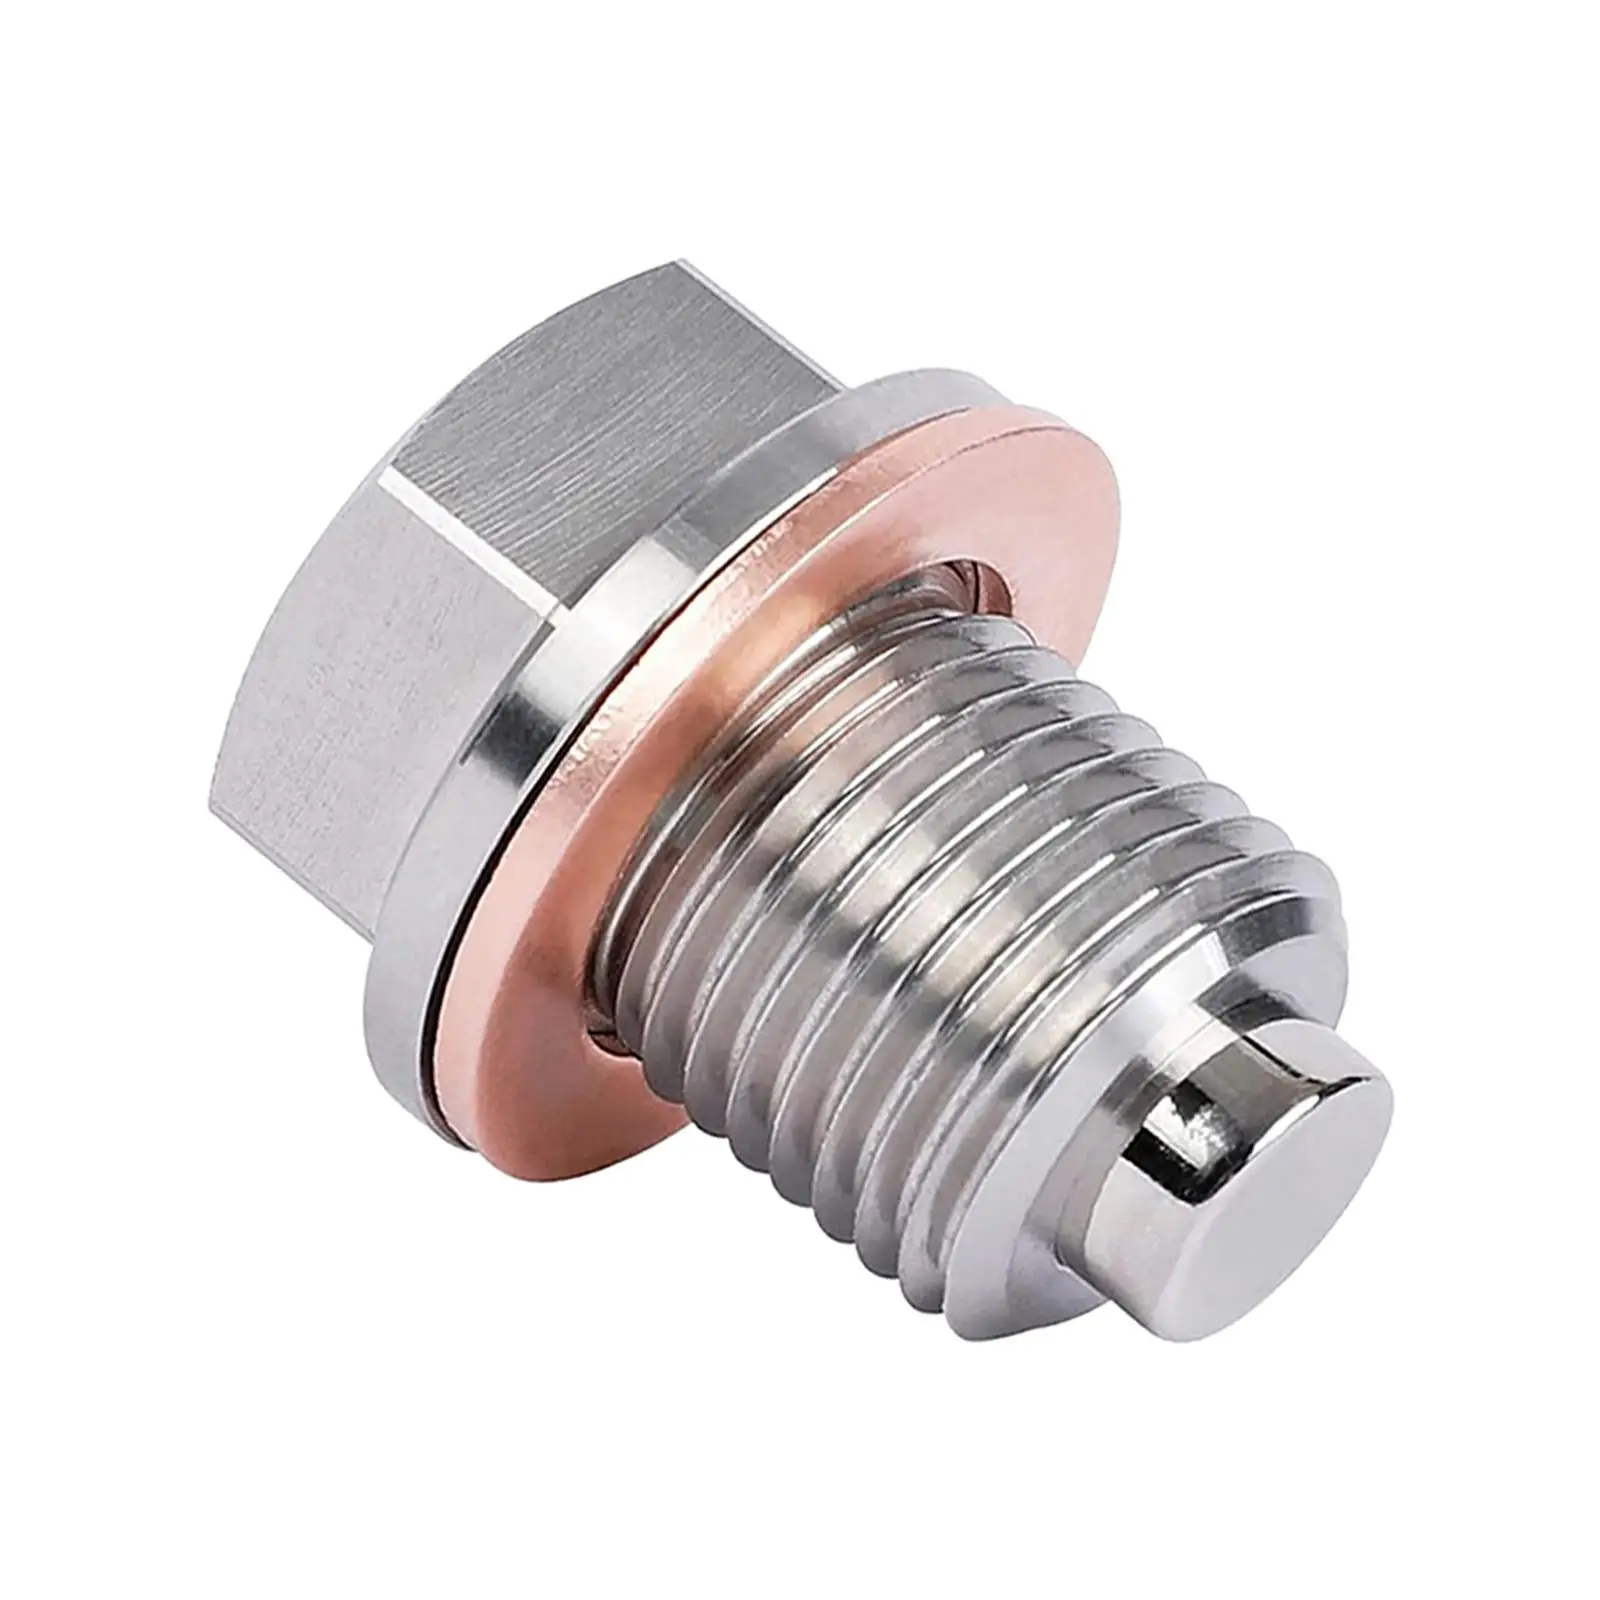 Oil Drain Plug M14x1.5 Replace Easy to Install Engine Oil Pan Protection Plug Neodymium Magnet Bolt for Motorcycle Car